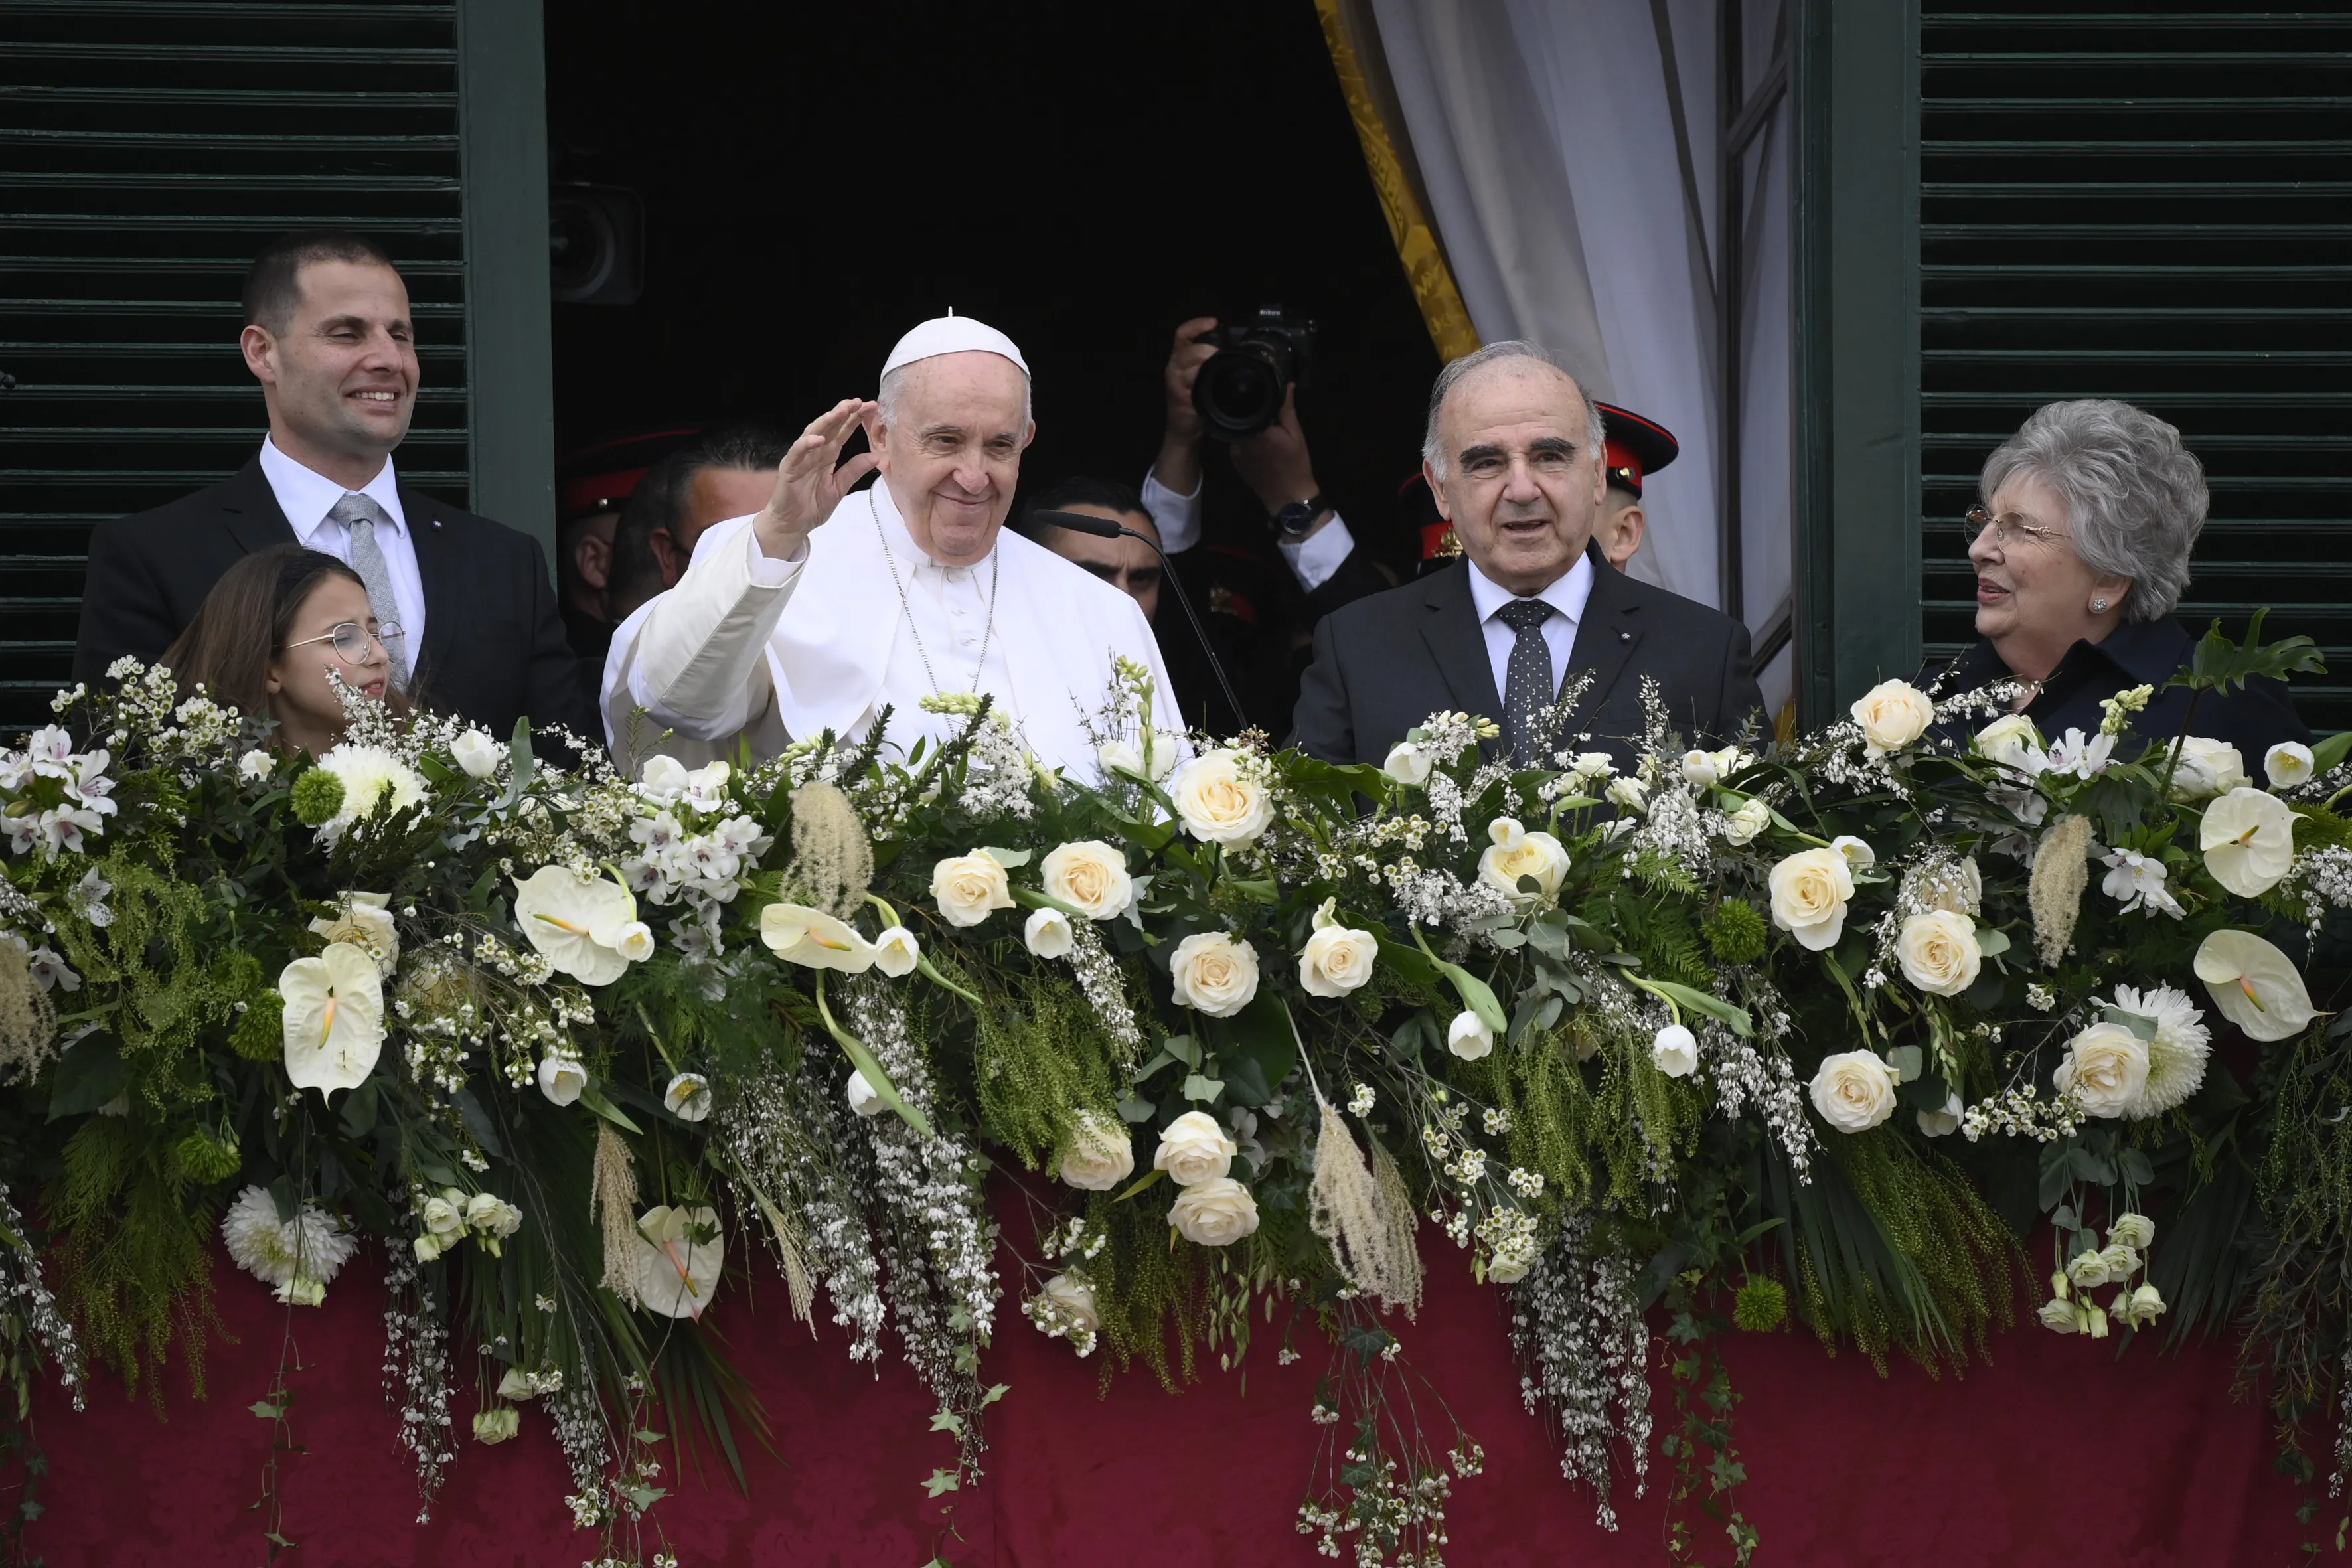 A lively crowd greeted Pope Francis as he arrived at the Grand Master’s Palace in Valletta, Malta, on April 2, 2022.?w=200&h=150